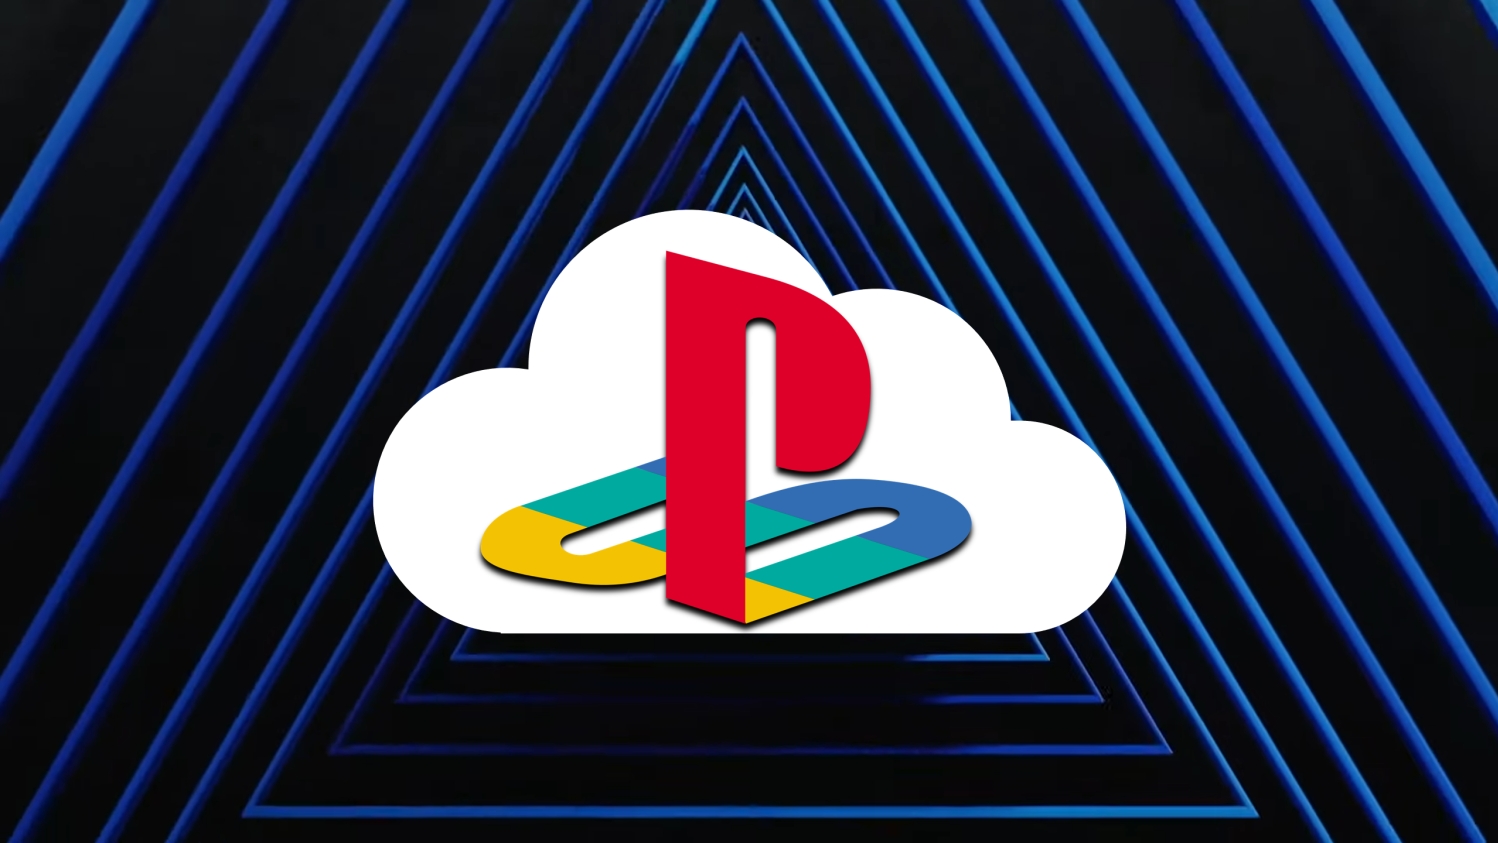 Sony announces PlayStation Now, its cloud gaming service for TVs